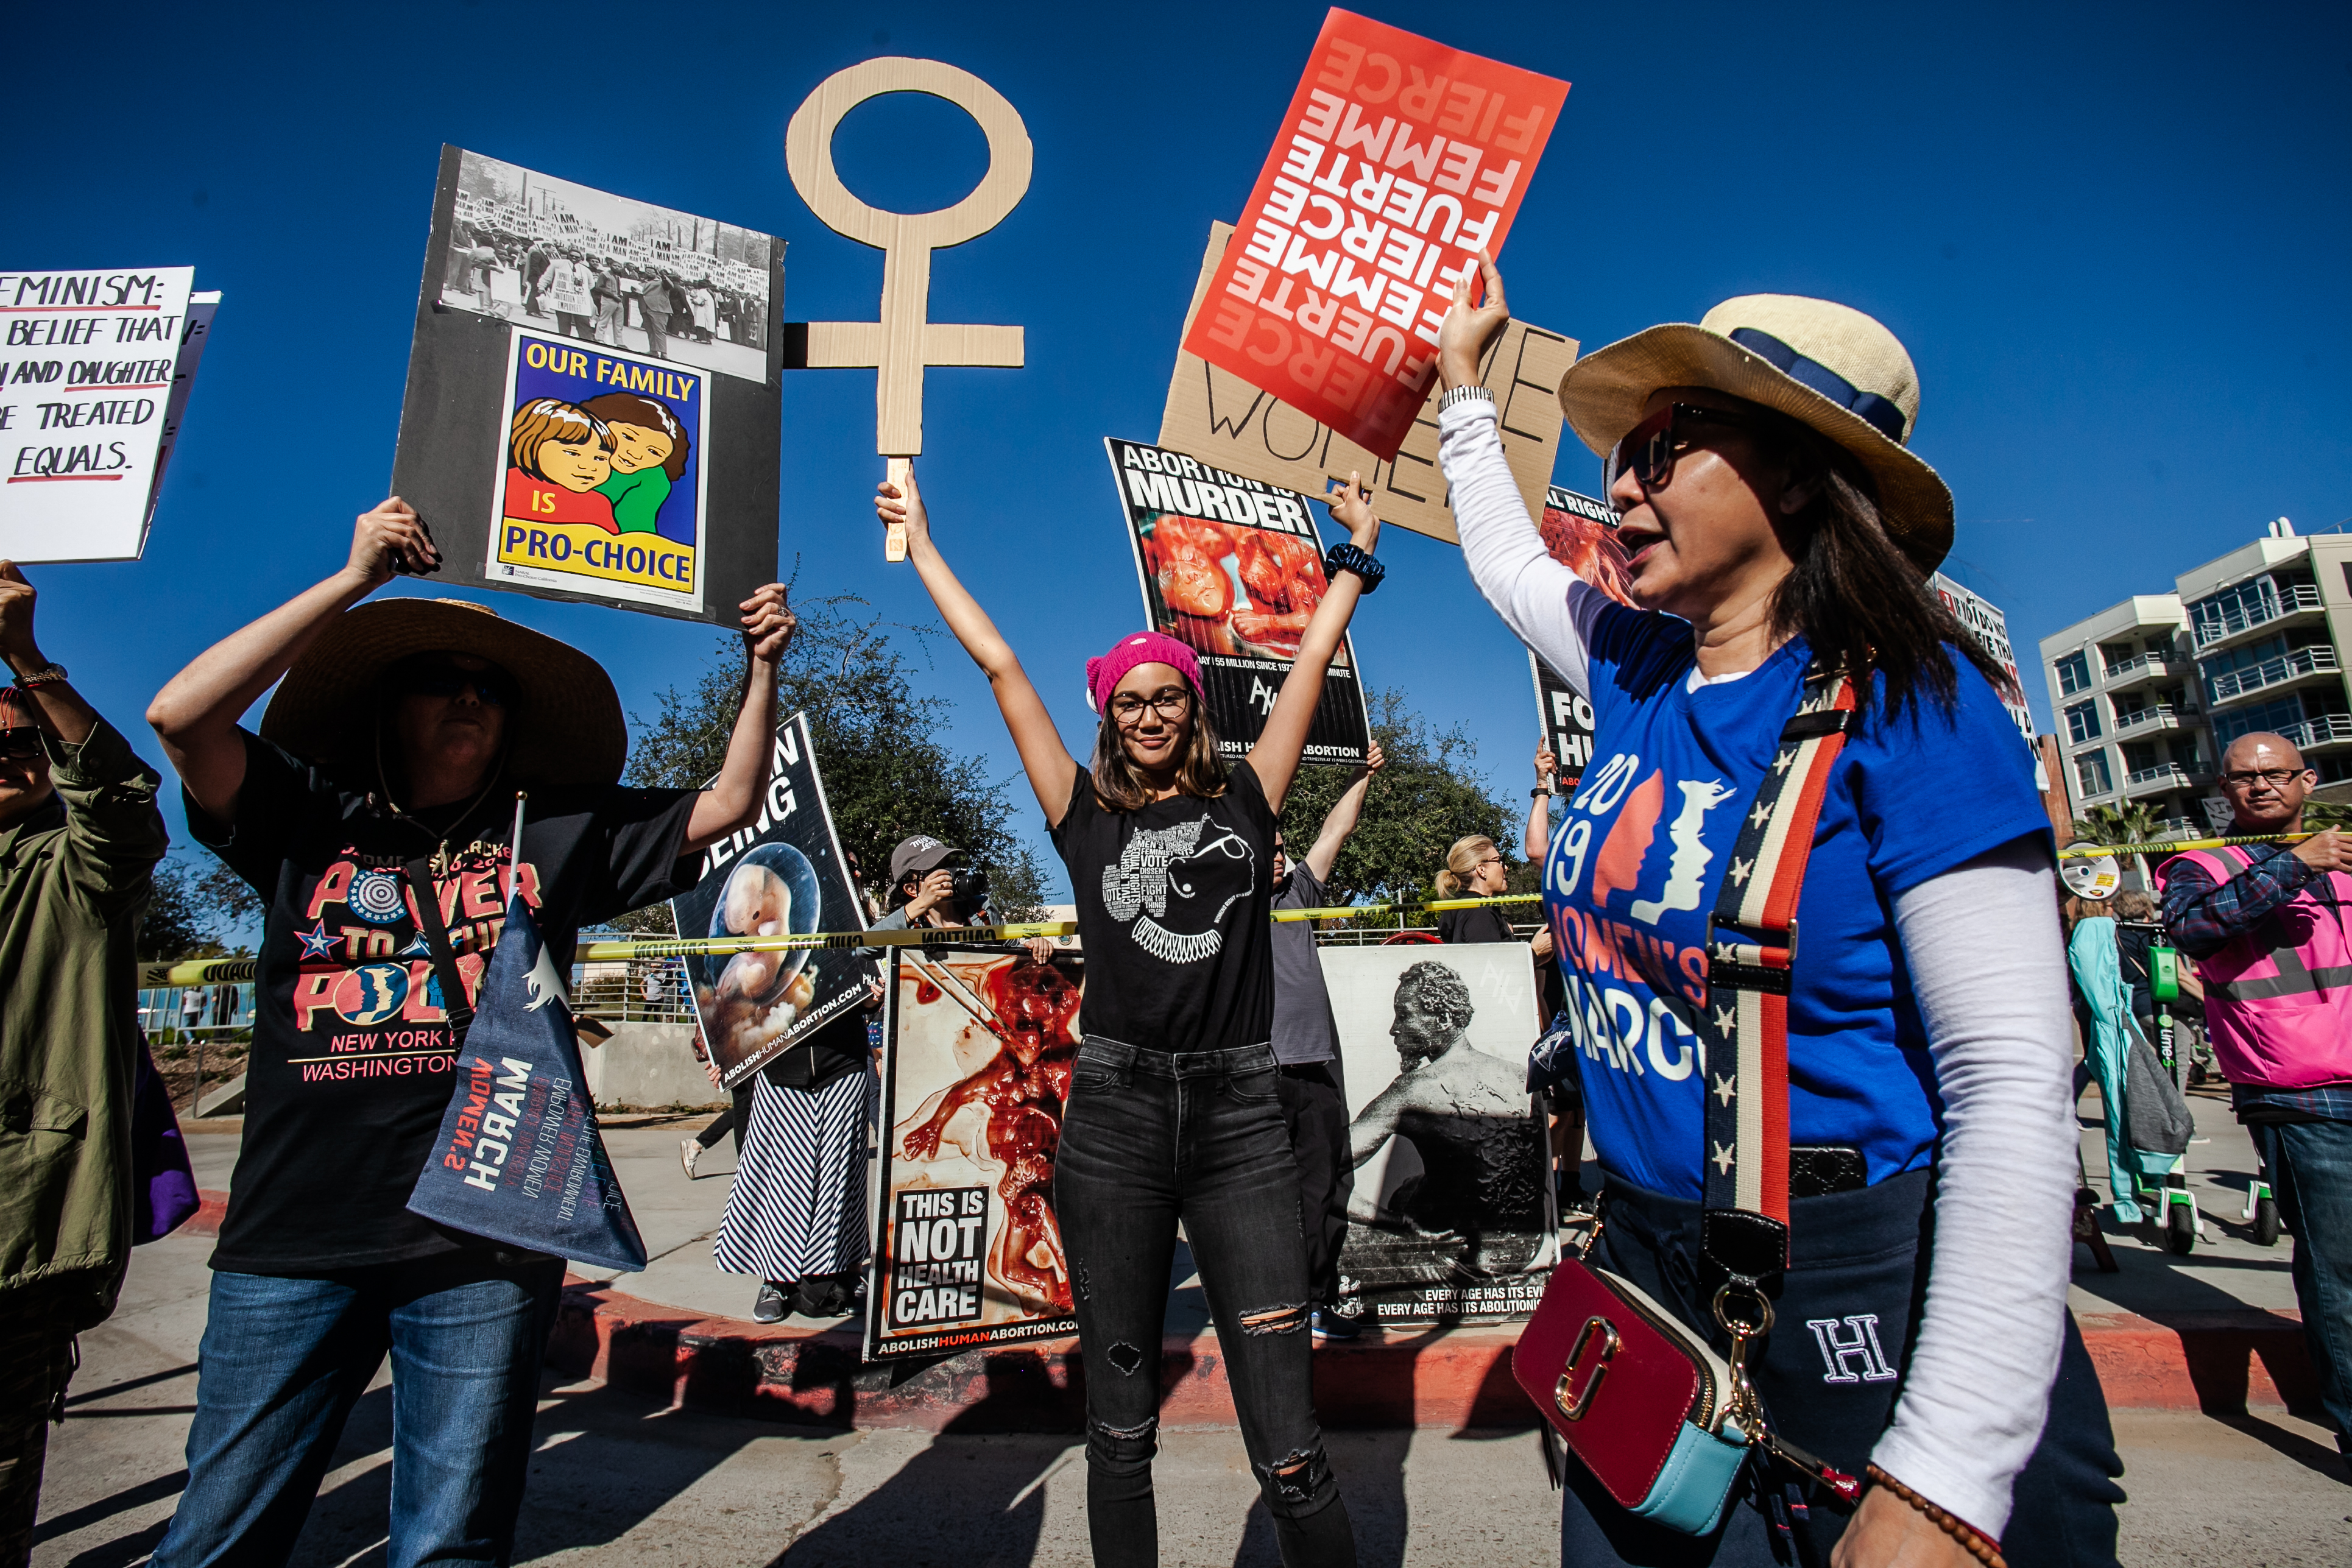 Thousands of women turned out Saturday to participate in Women’s March 2019 in downtown San Diego and dozens of other cities across the country in a push for social justice and federal policies that promote equality for all.